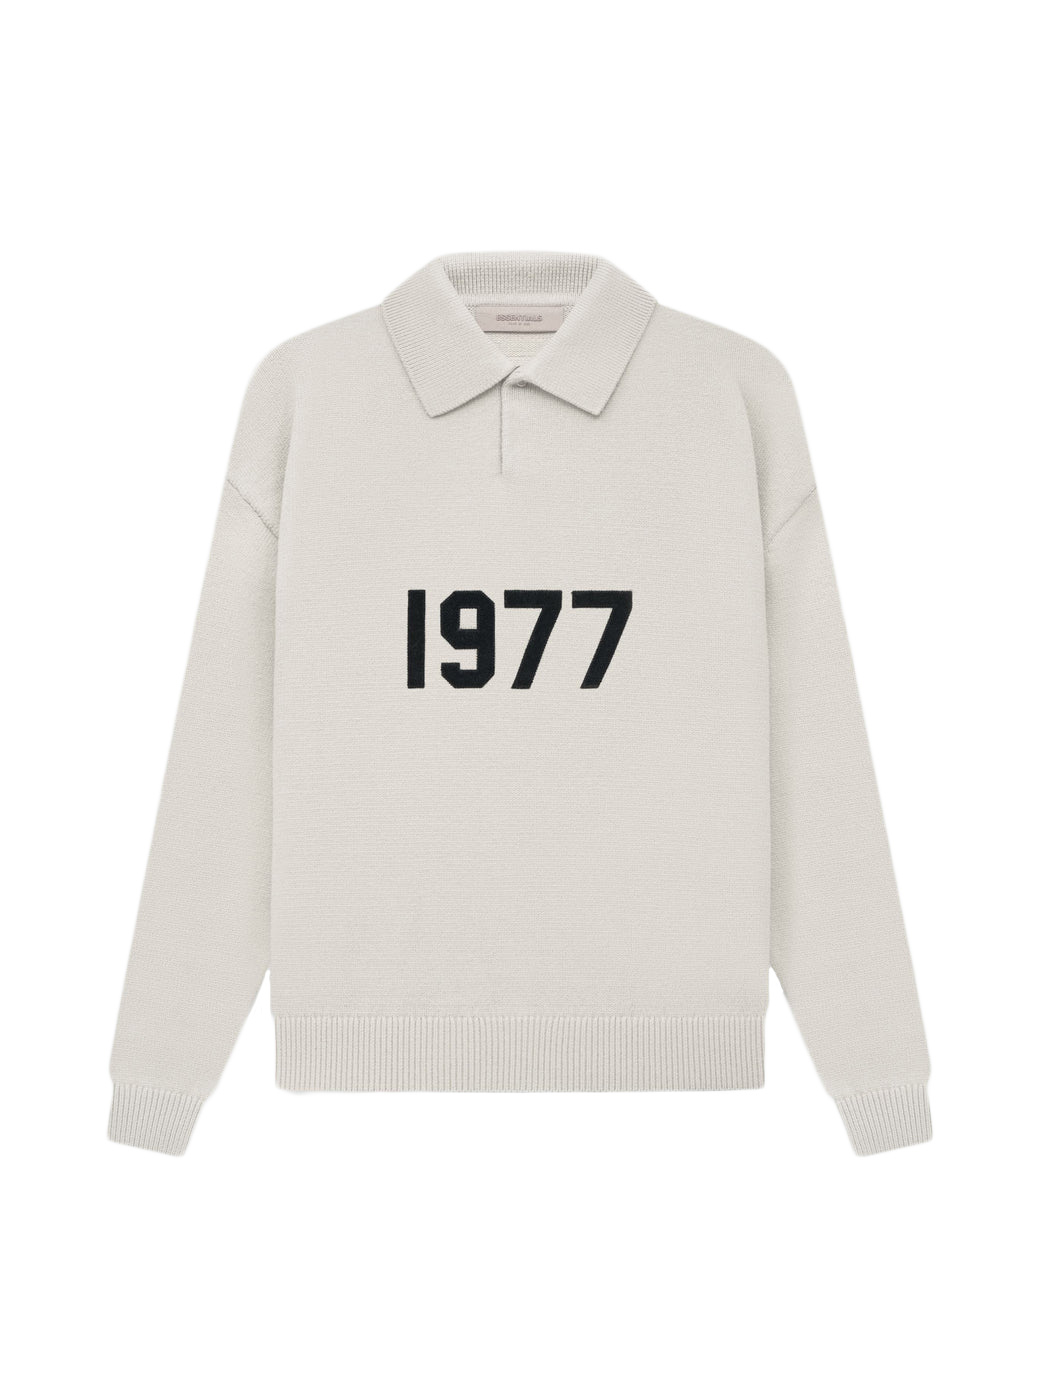 Fear of God Essentials 1977 Knit L/S Polo Wheat Men's - SS22 - US